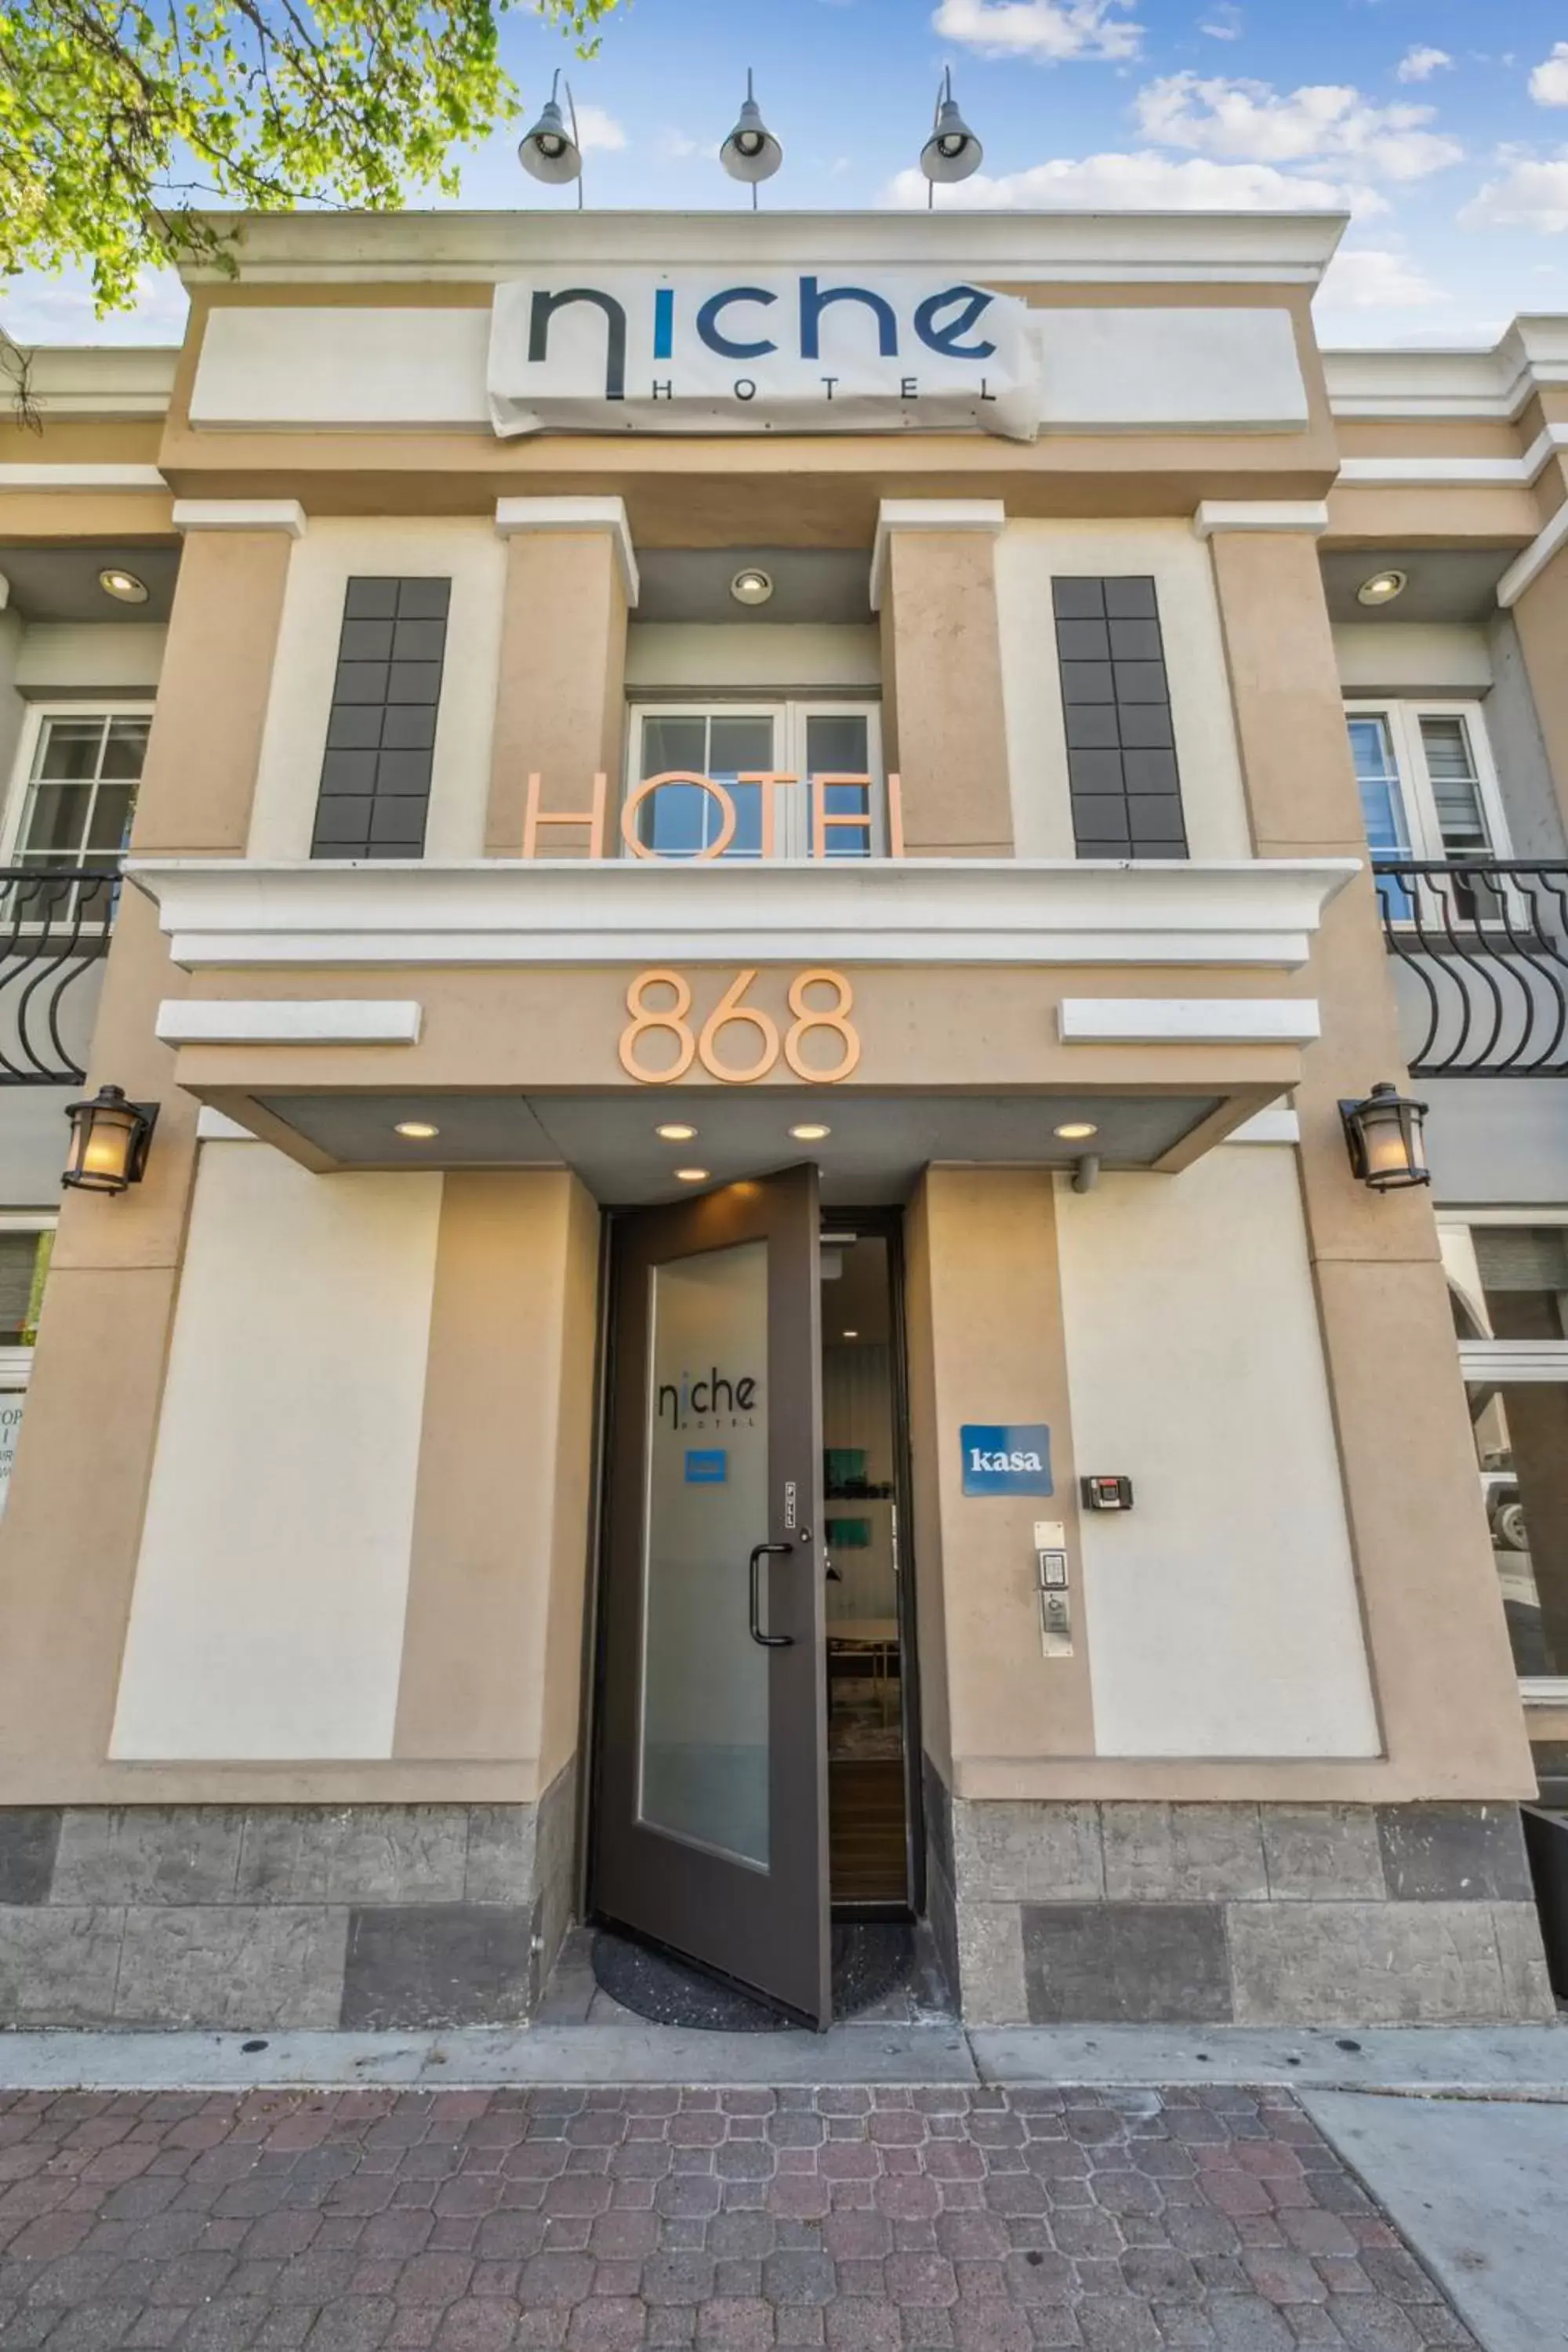 Property Building in Kasa Niche Hotel Redwood City